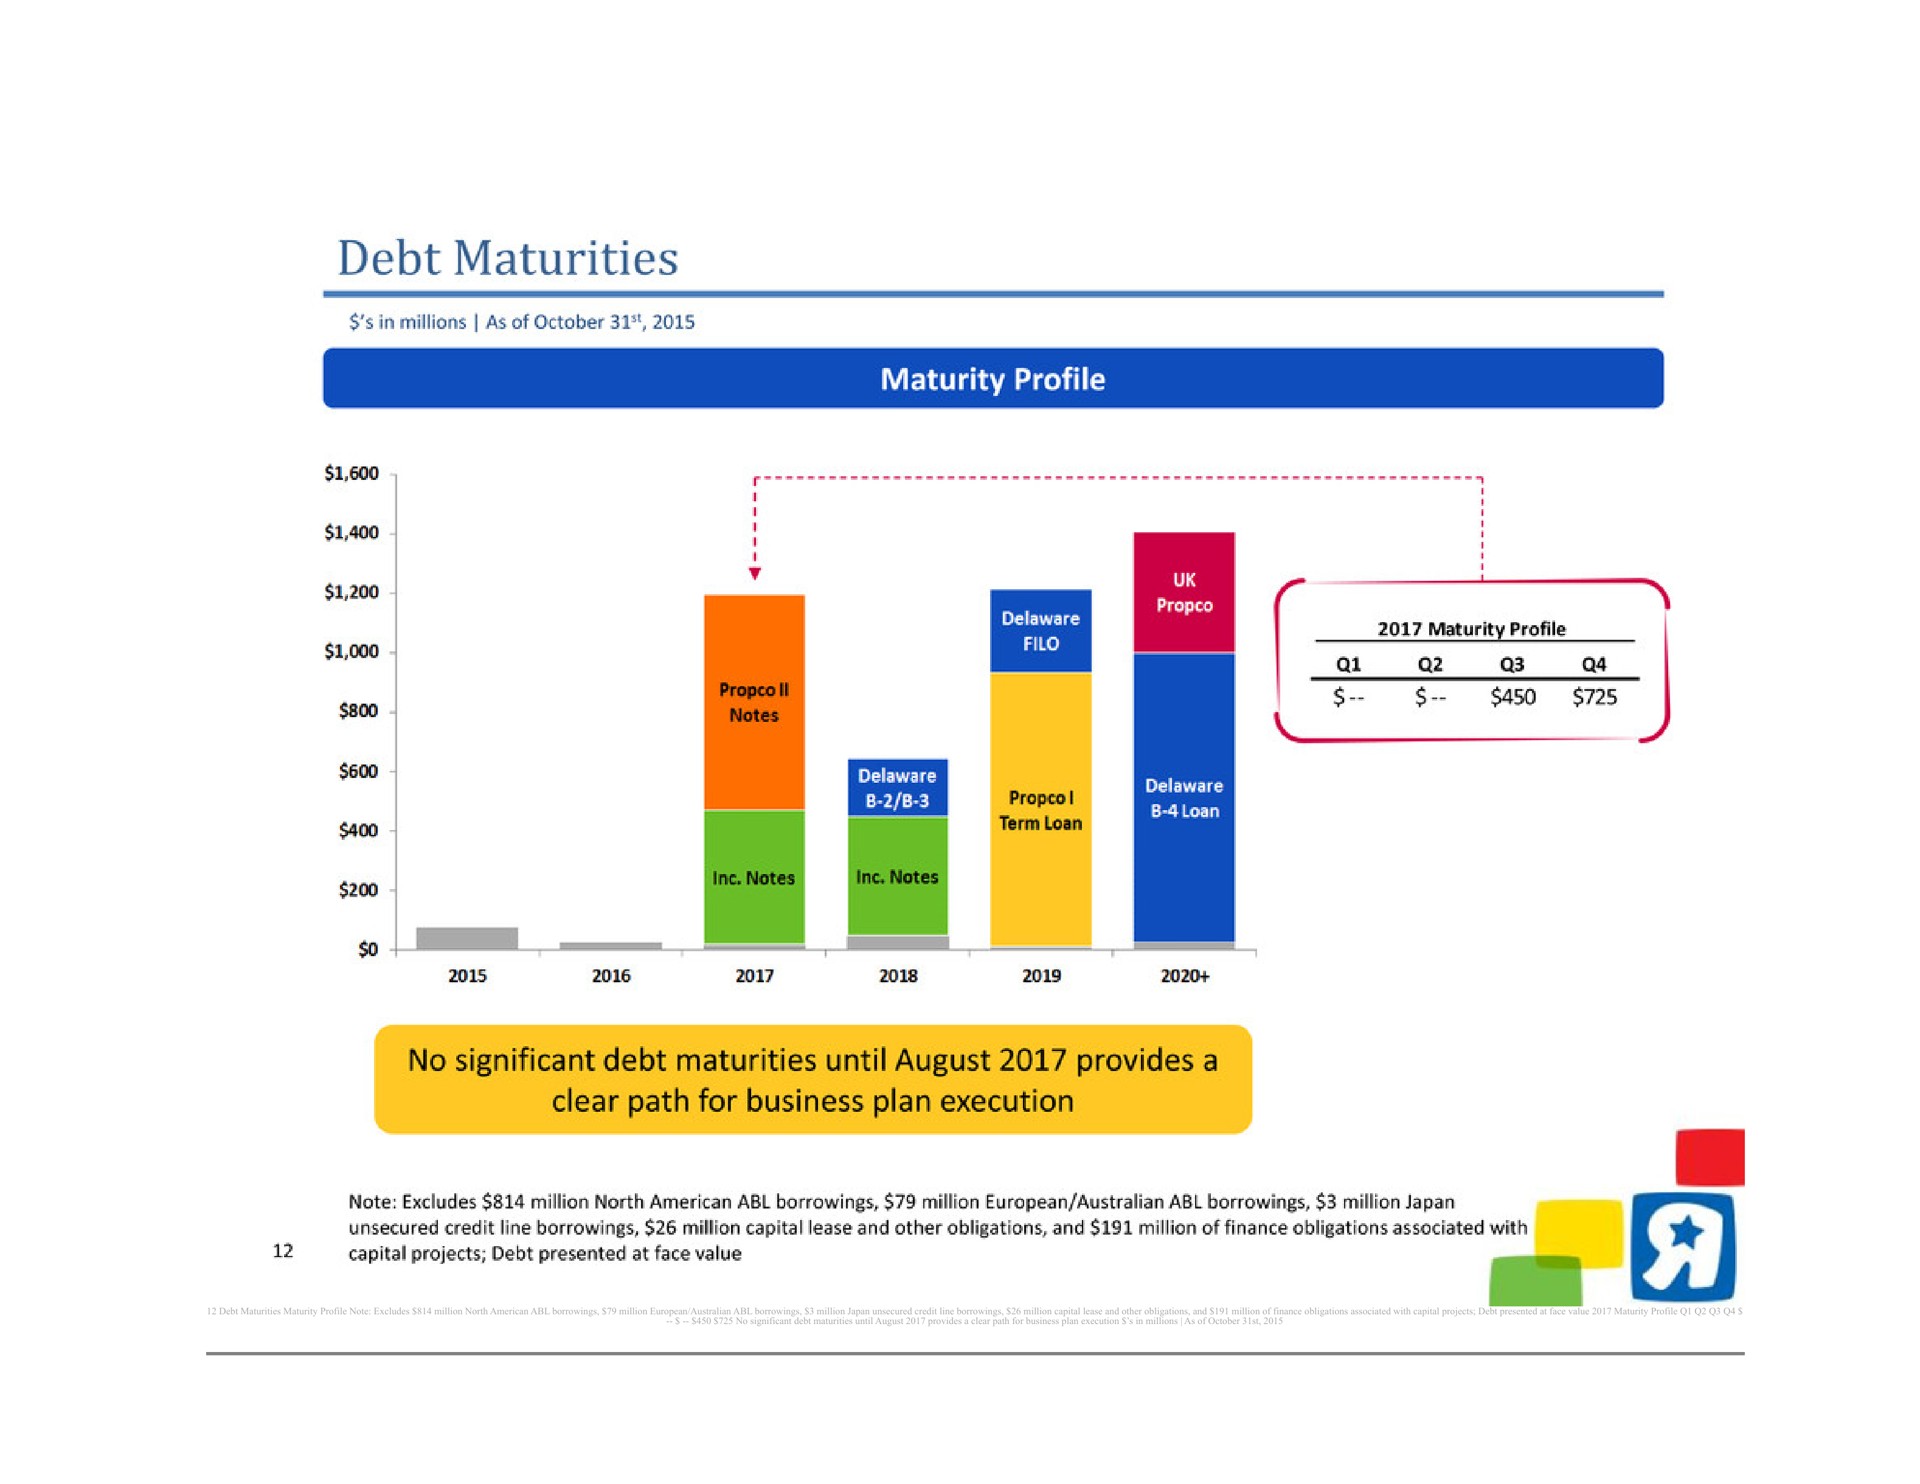 debt maturities maturity profile note excludes million north borrowings million borrowings million japan unsecured credit line borrowings million capital lease and other obligations and million of finance obligations associated with capital projects debt presented at face value maturity profile no significant debt maturities until august provides a clear path for business plan execution in millions as of | Toys R Us